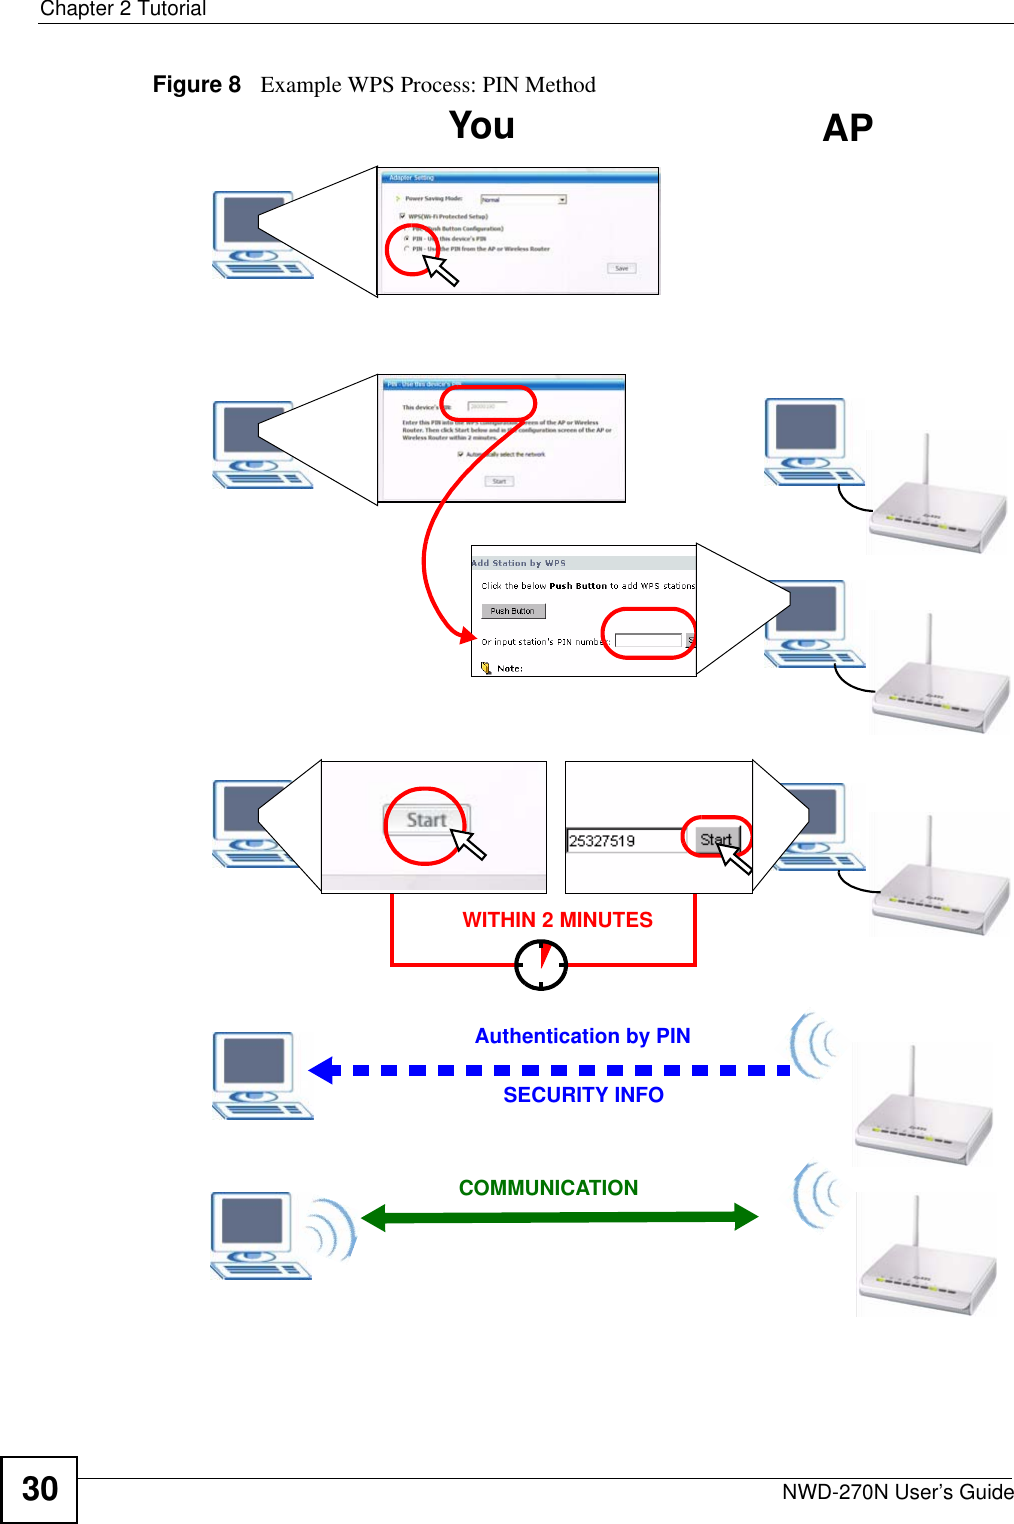 Chapter 2 TutorialNWD-270N User’s Guide30Figure 8   Example WPS Process: PIN MethodAuthentication by PINSECURITY INFOWITHIN 2 MINUTESCOMMUNICATIONYou AP